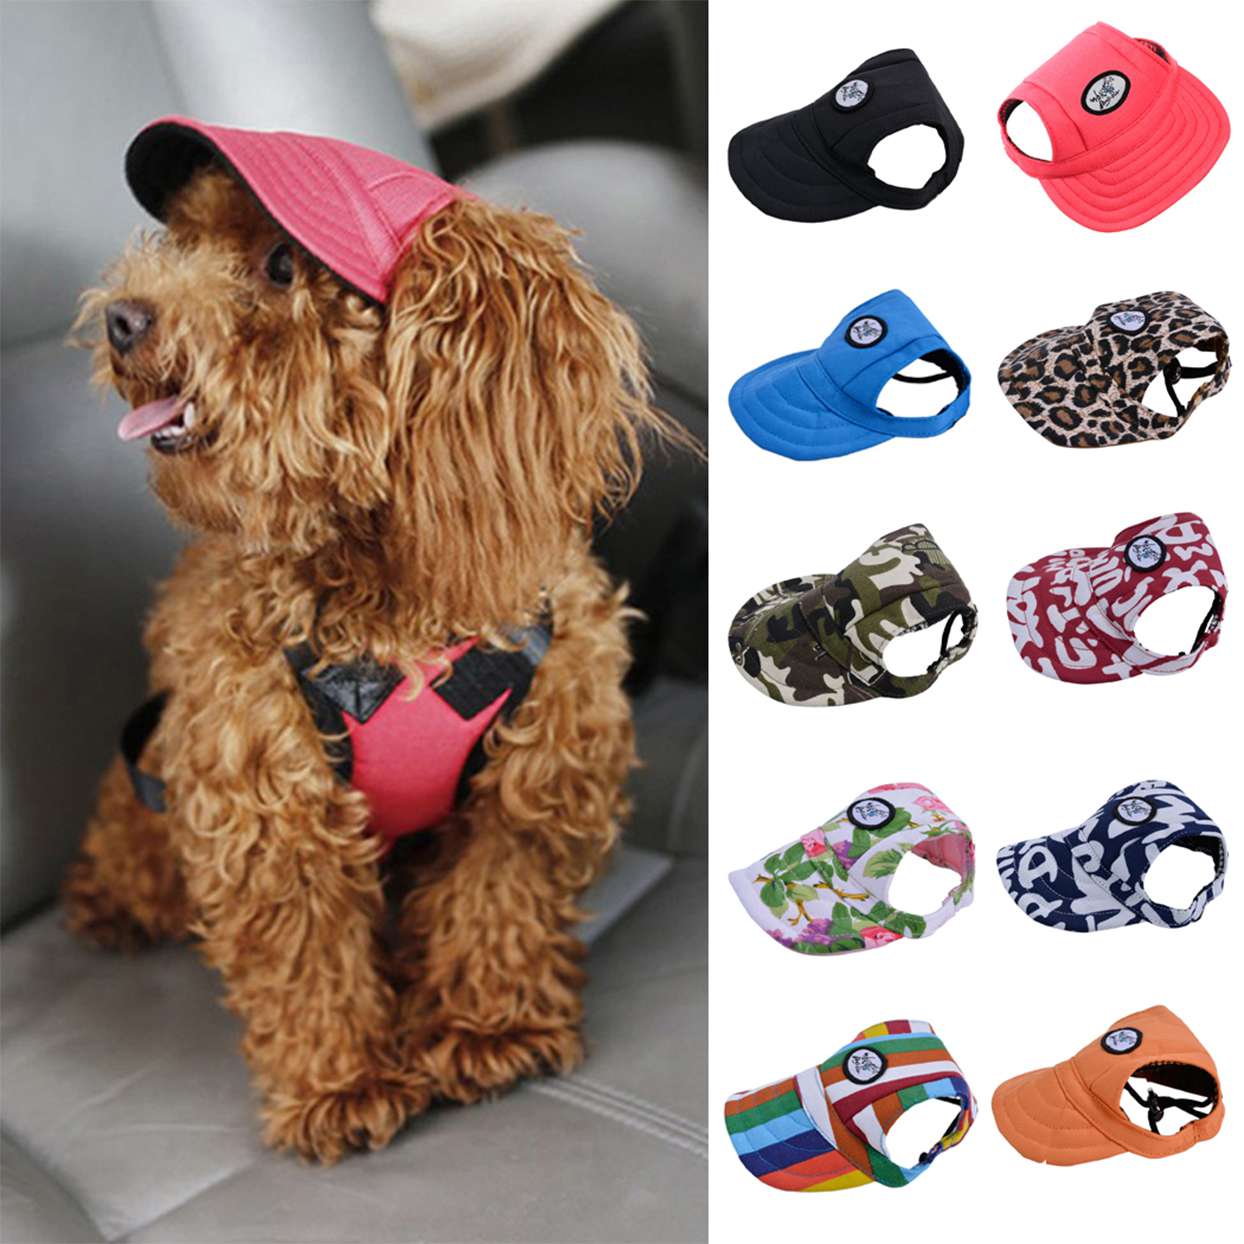 Pink 2 Pieces Pet Baseball Cap and Dog Bandana Set Pet Outdoor Sport Hat Pet Canvas Hats Sun Protection Dog Visor Cap with Ear Holes and Adjustable Strap for Small Dog Pet Hats Costume Accessories 